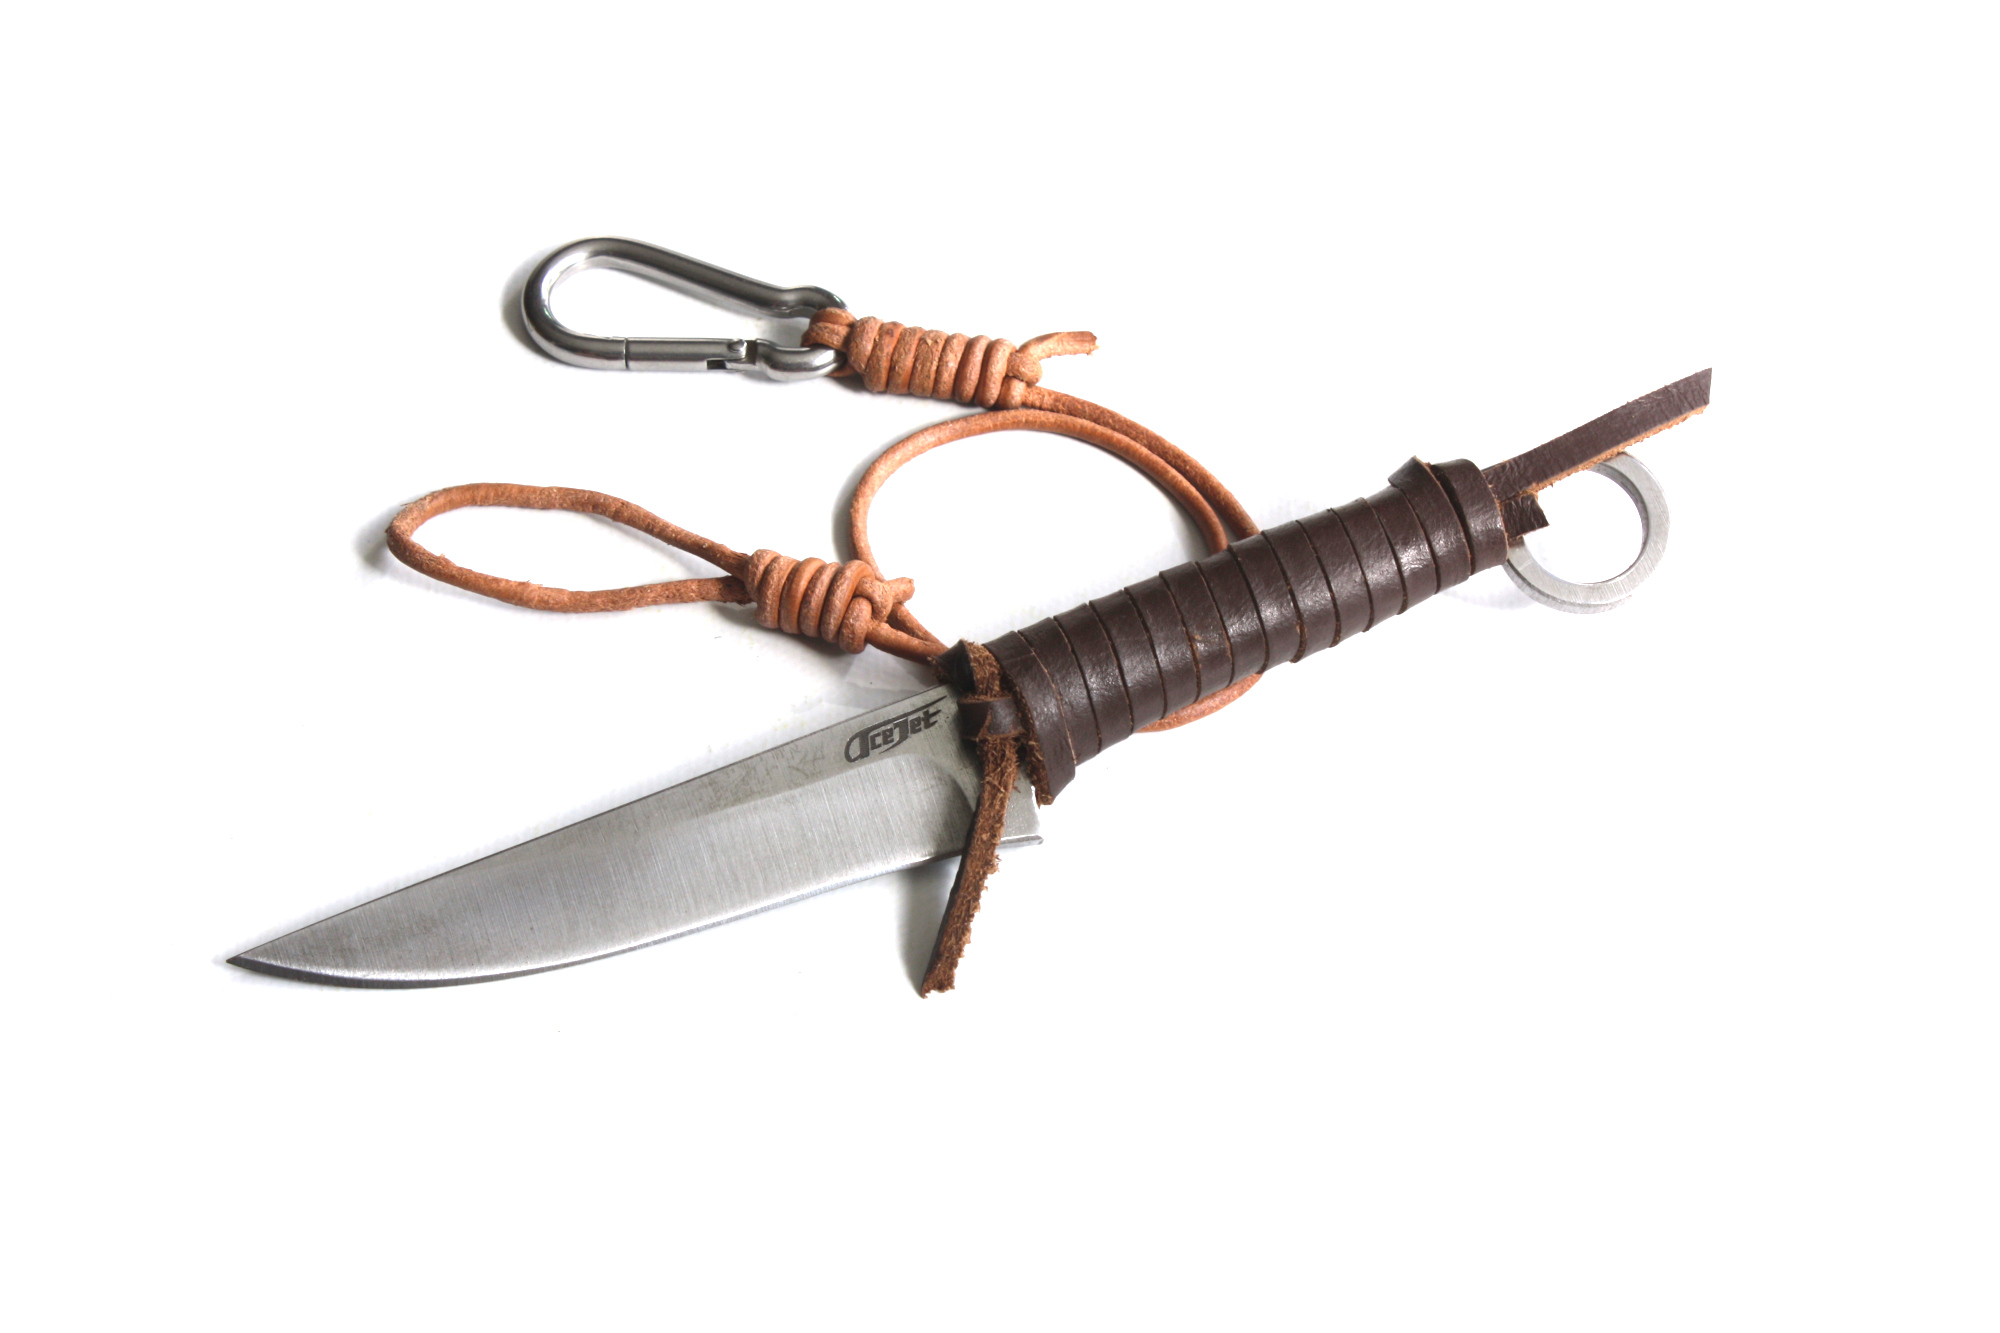 ACEJET Classic Celtic Knife - 8", Brown Cord